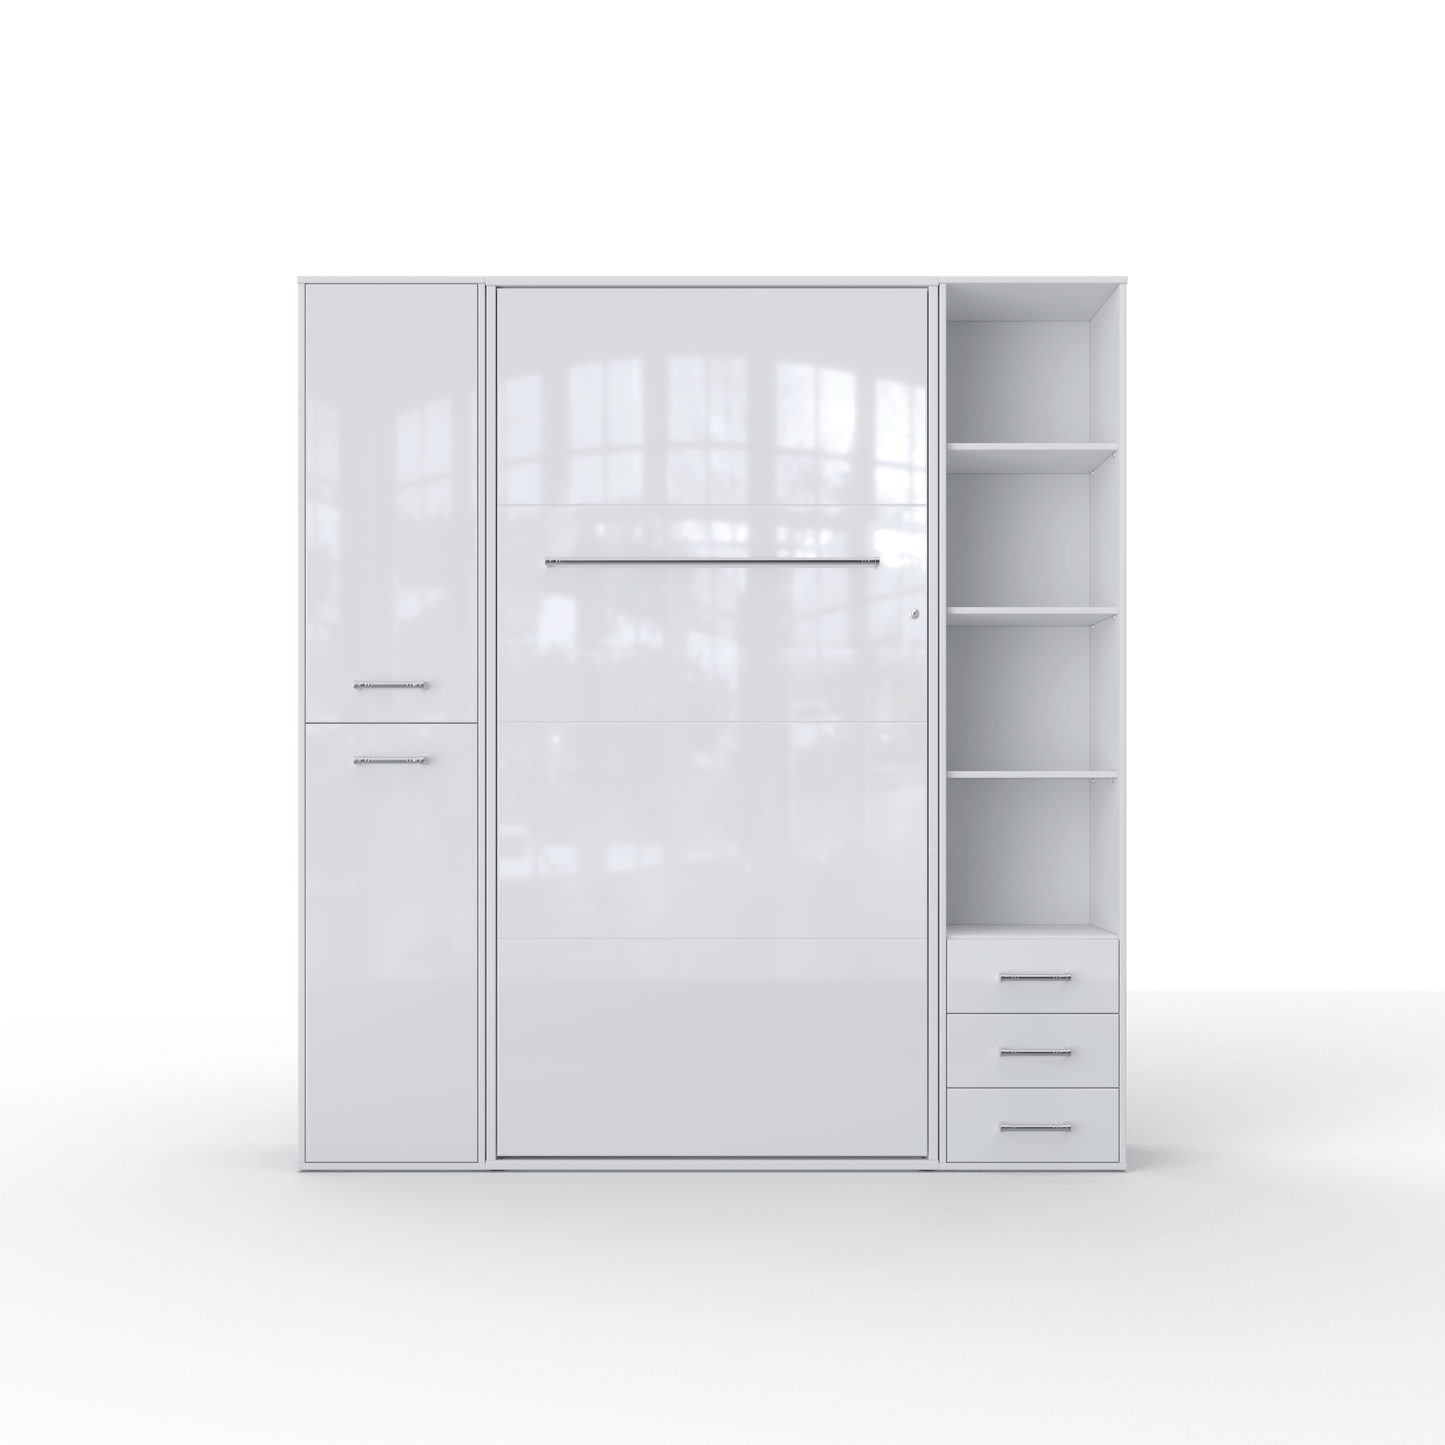 Maxima House Vertical Murphy Bed Invento, European Queen Size with mattress and 2 storage cabinets White/White IN160V-08/09W